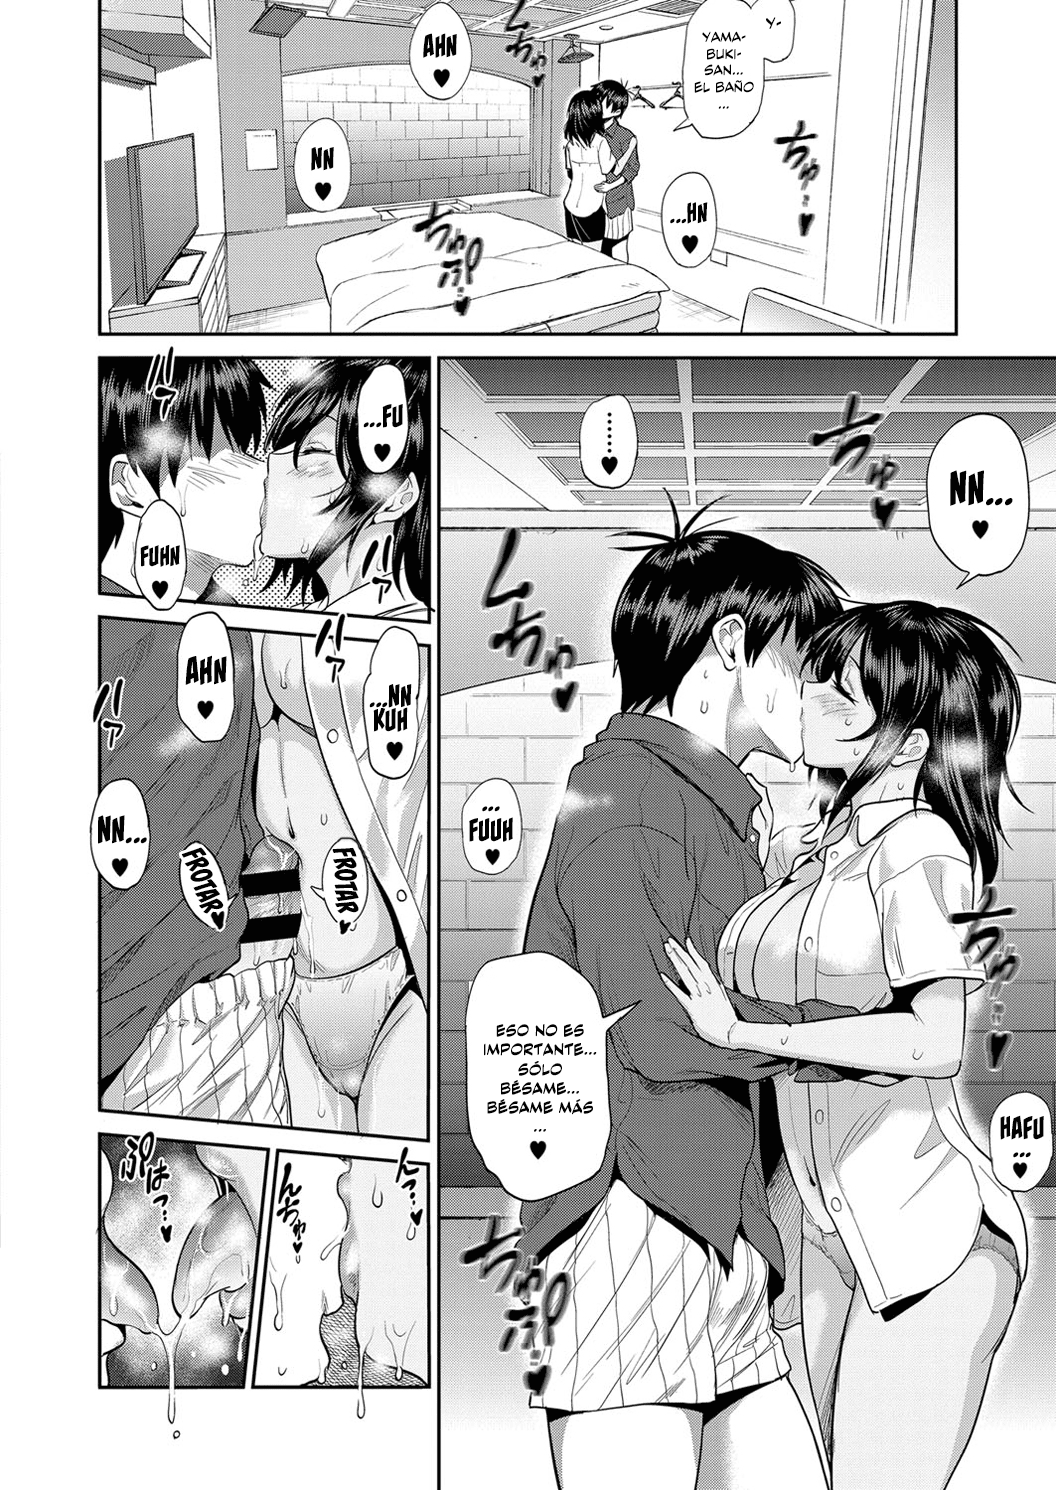 [DISTANCE] Joshi Lacu! - Girls Lacrosse Club ~2 Years Later~ Cap.08.5 (COMIC ExE 13) [Español] [NicoNiiScans] [Digital] [DISTANCE] じょしラク! ～2 Years Later～ 第8.5話 (コミック エグゼ 13) [スペイン翻訳] [DL版]